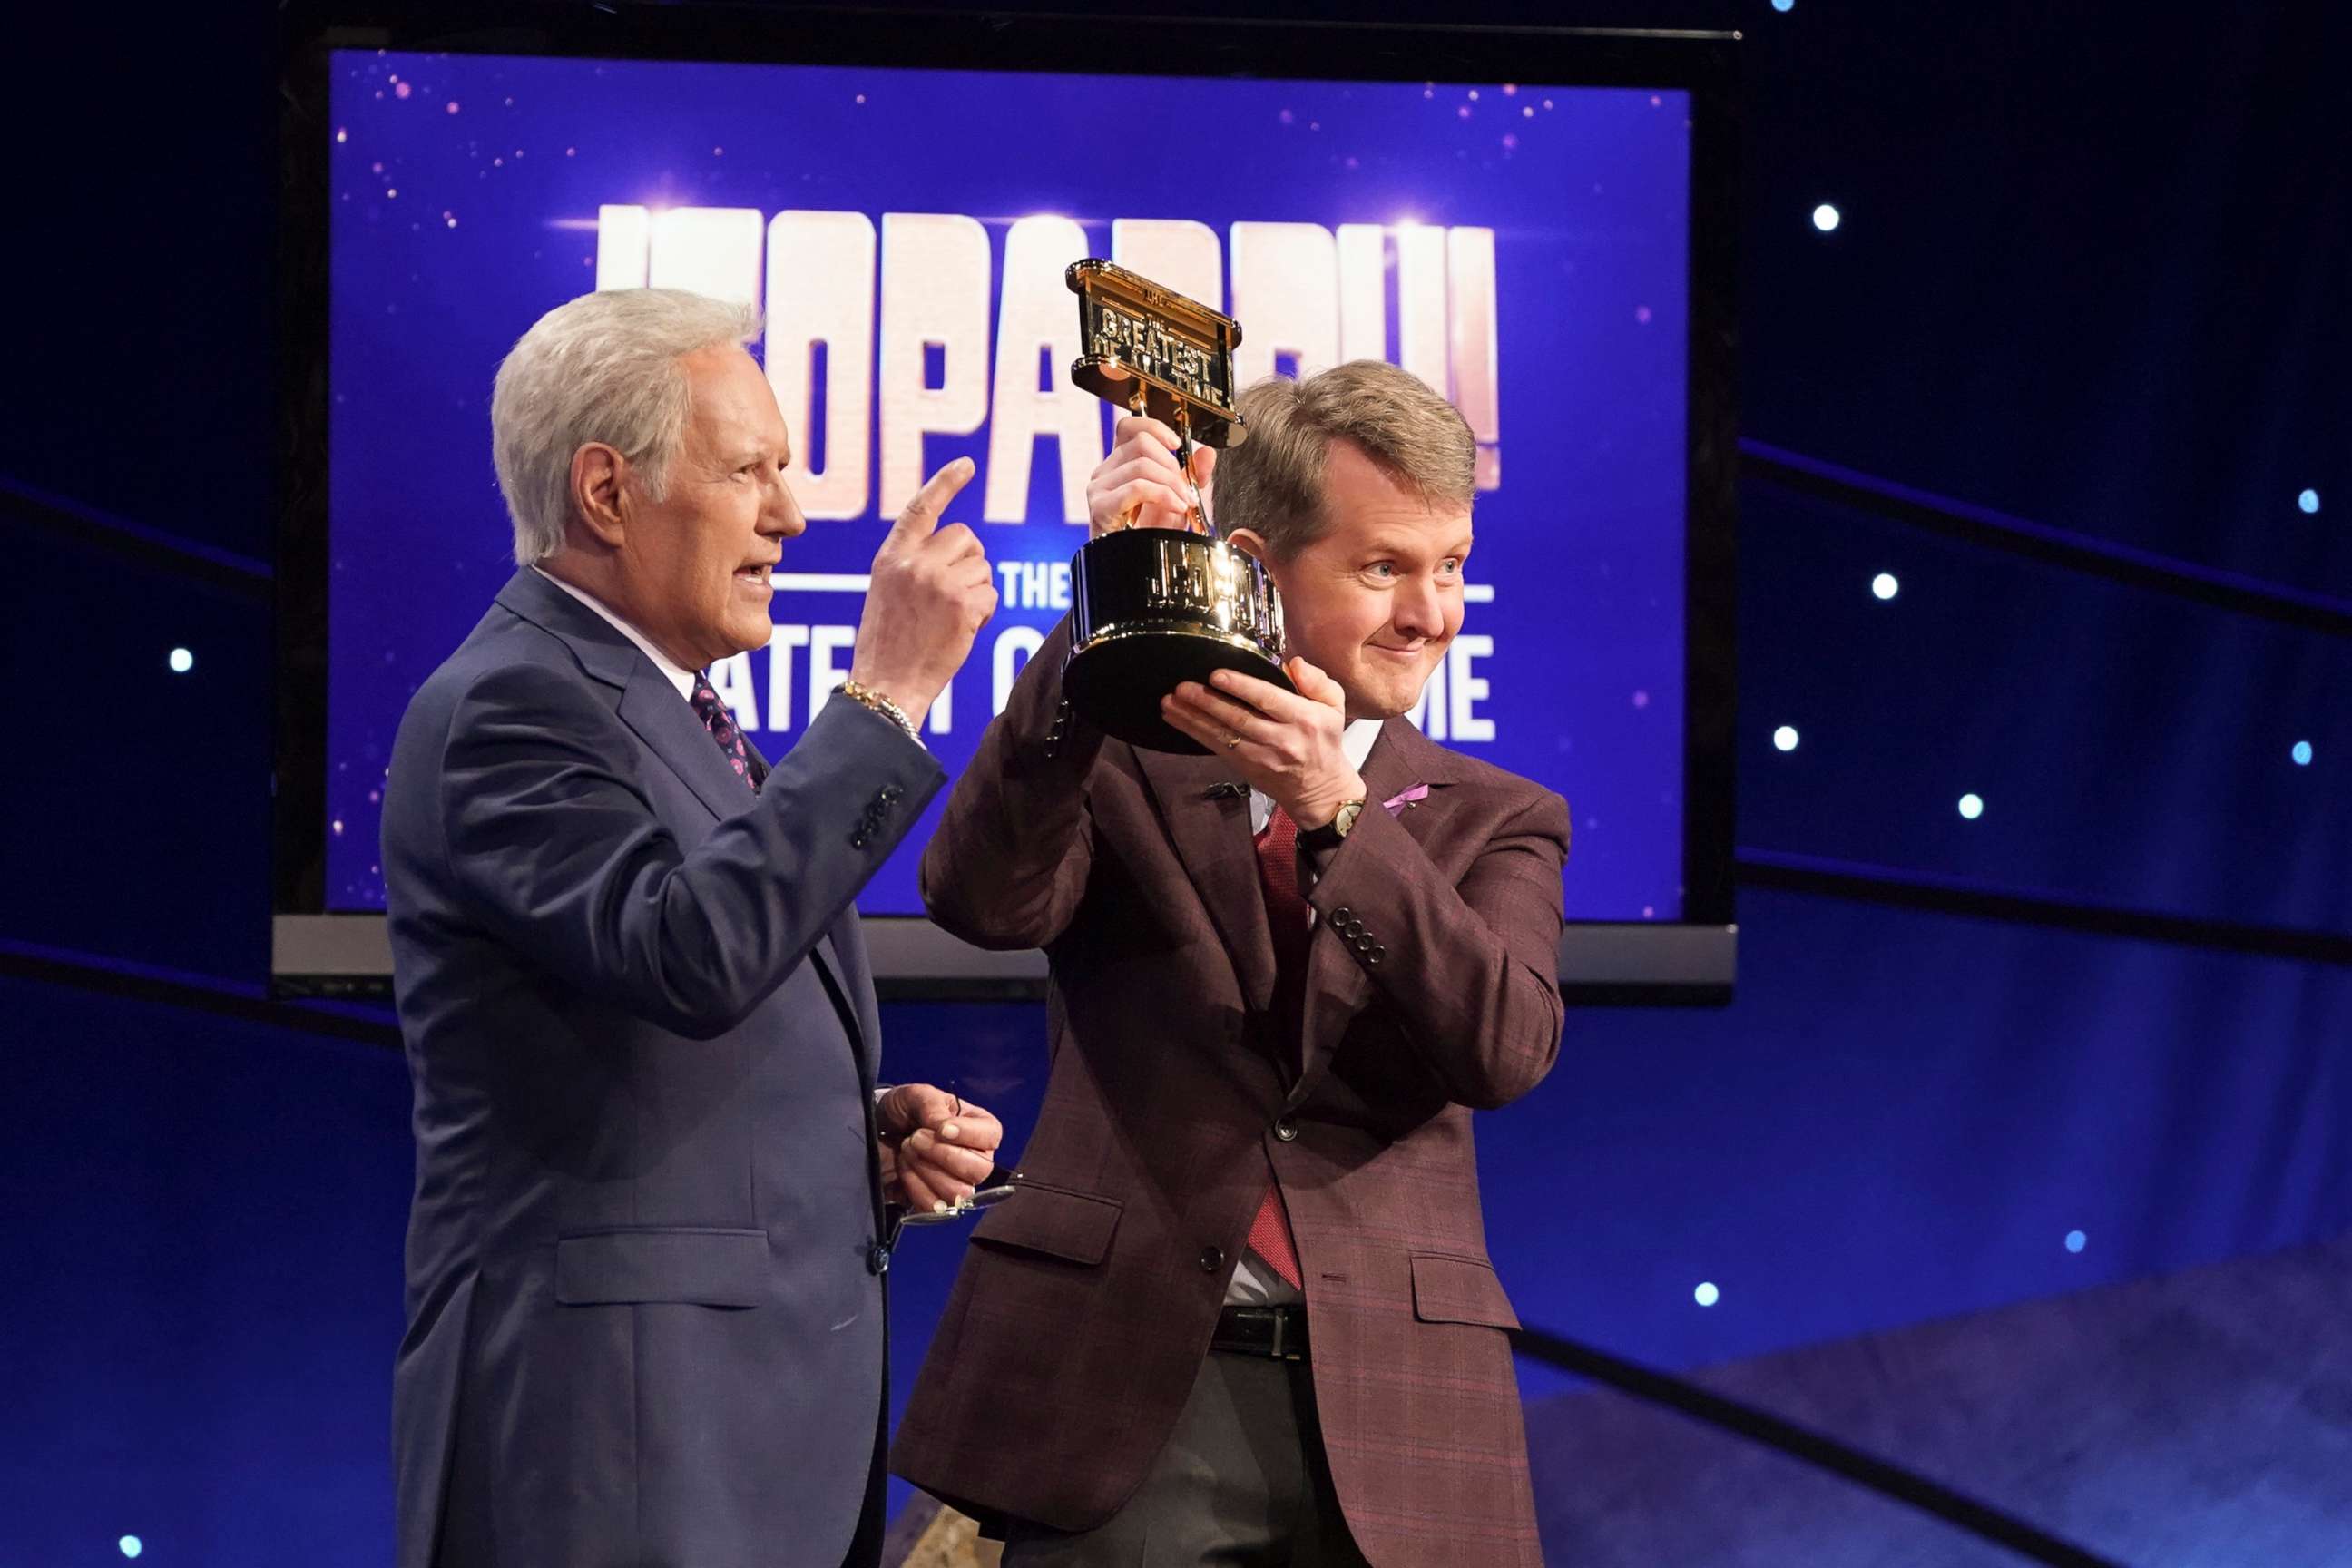 PHOTO: Alec Trebek and Ken Jennings on "Jeopardy! The Greatest of All Time," on Jan 14, 2020.